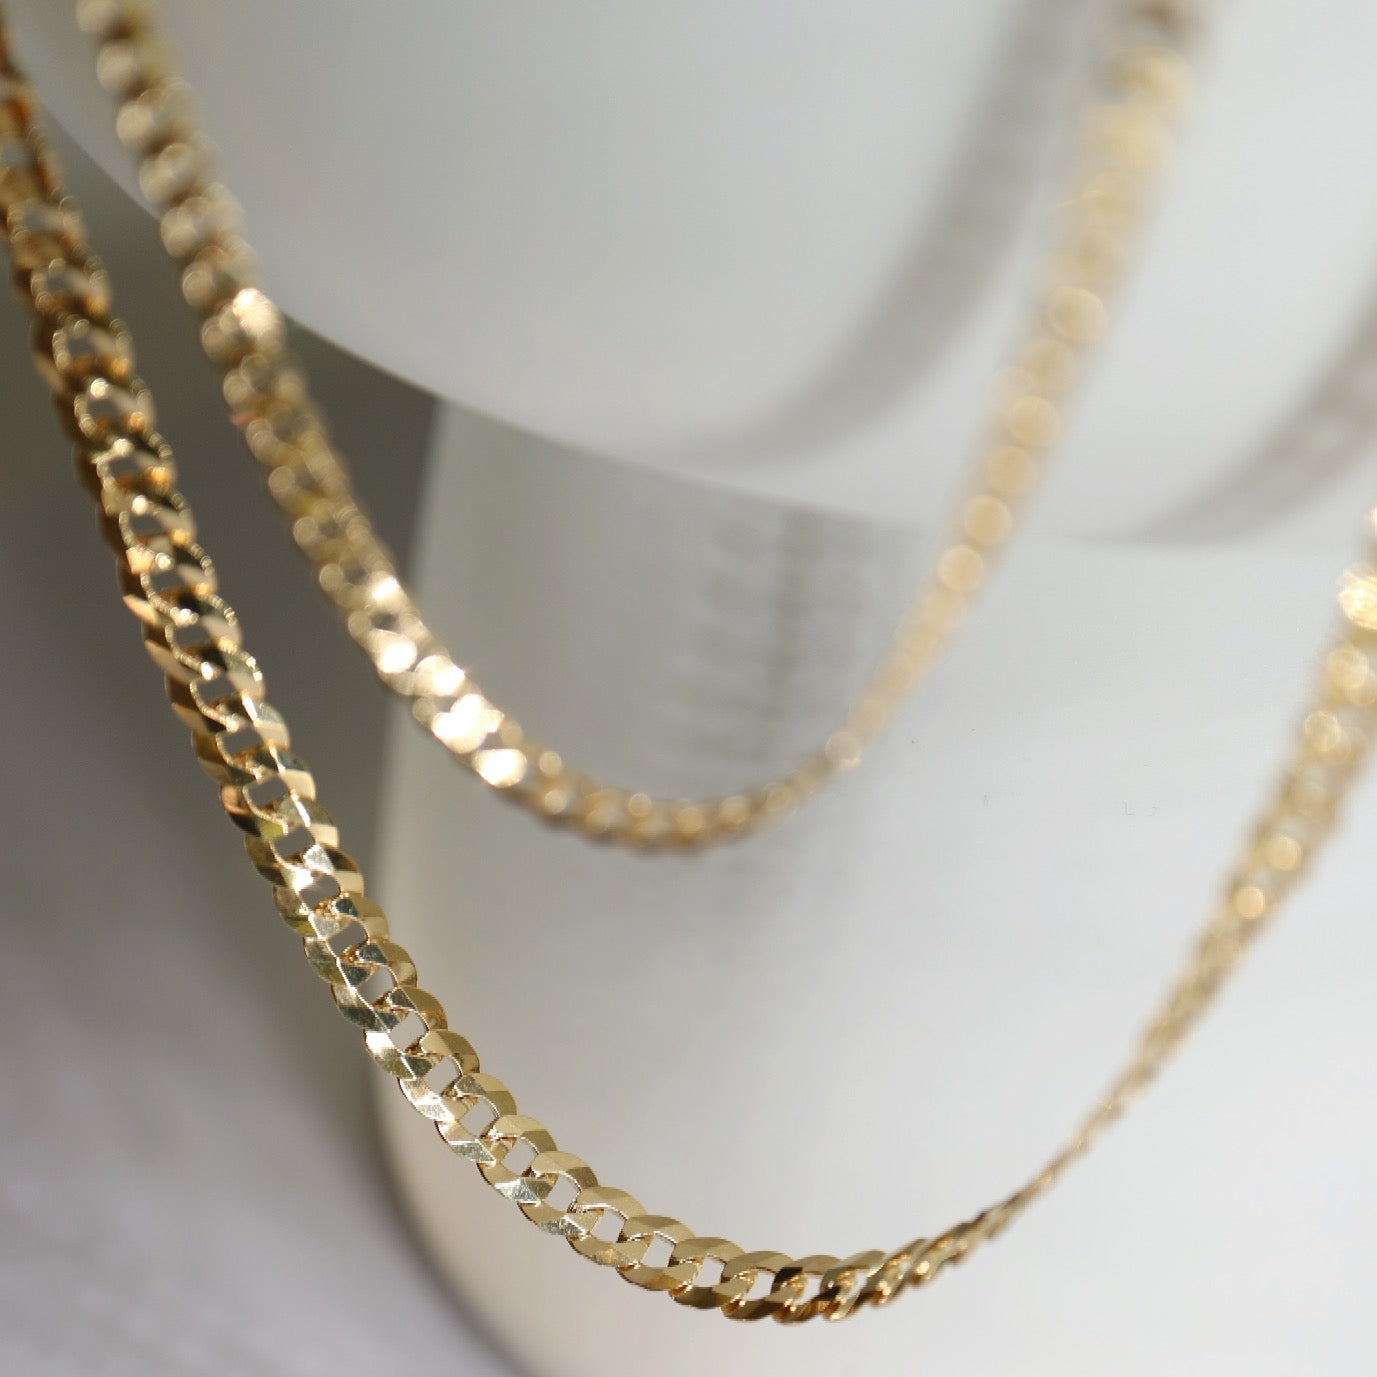 9kt gold Curb Chains from Collective & Co Jewellery